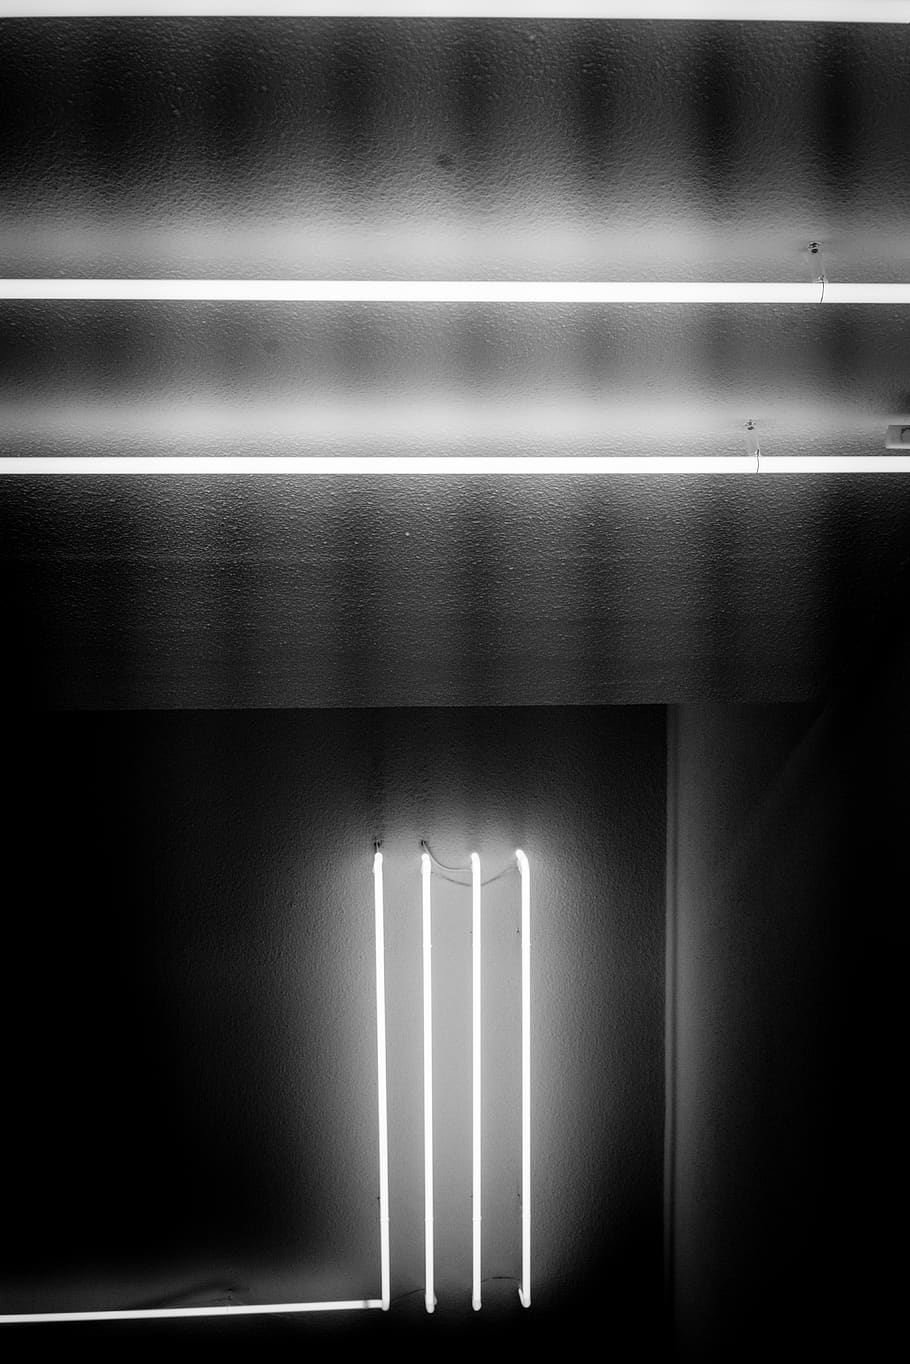 Greyscale Photography Of Lighted Fluorescent Lamps - Light - HD Wallpaper 